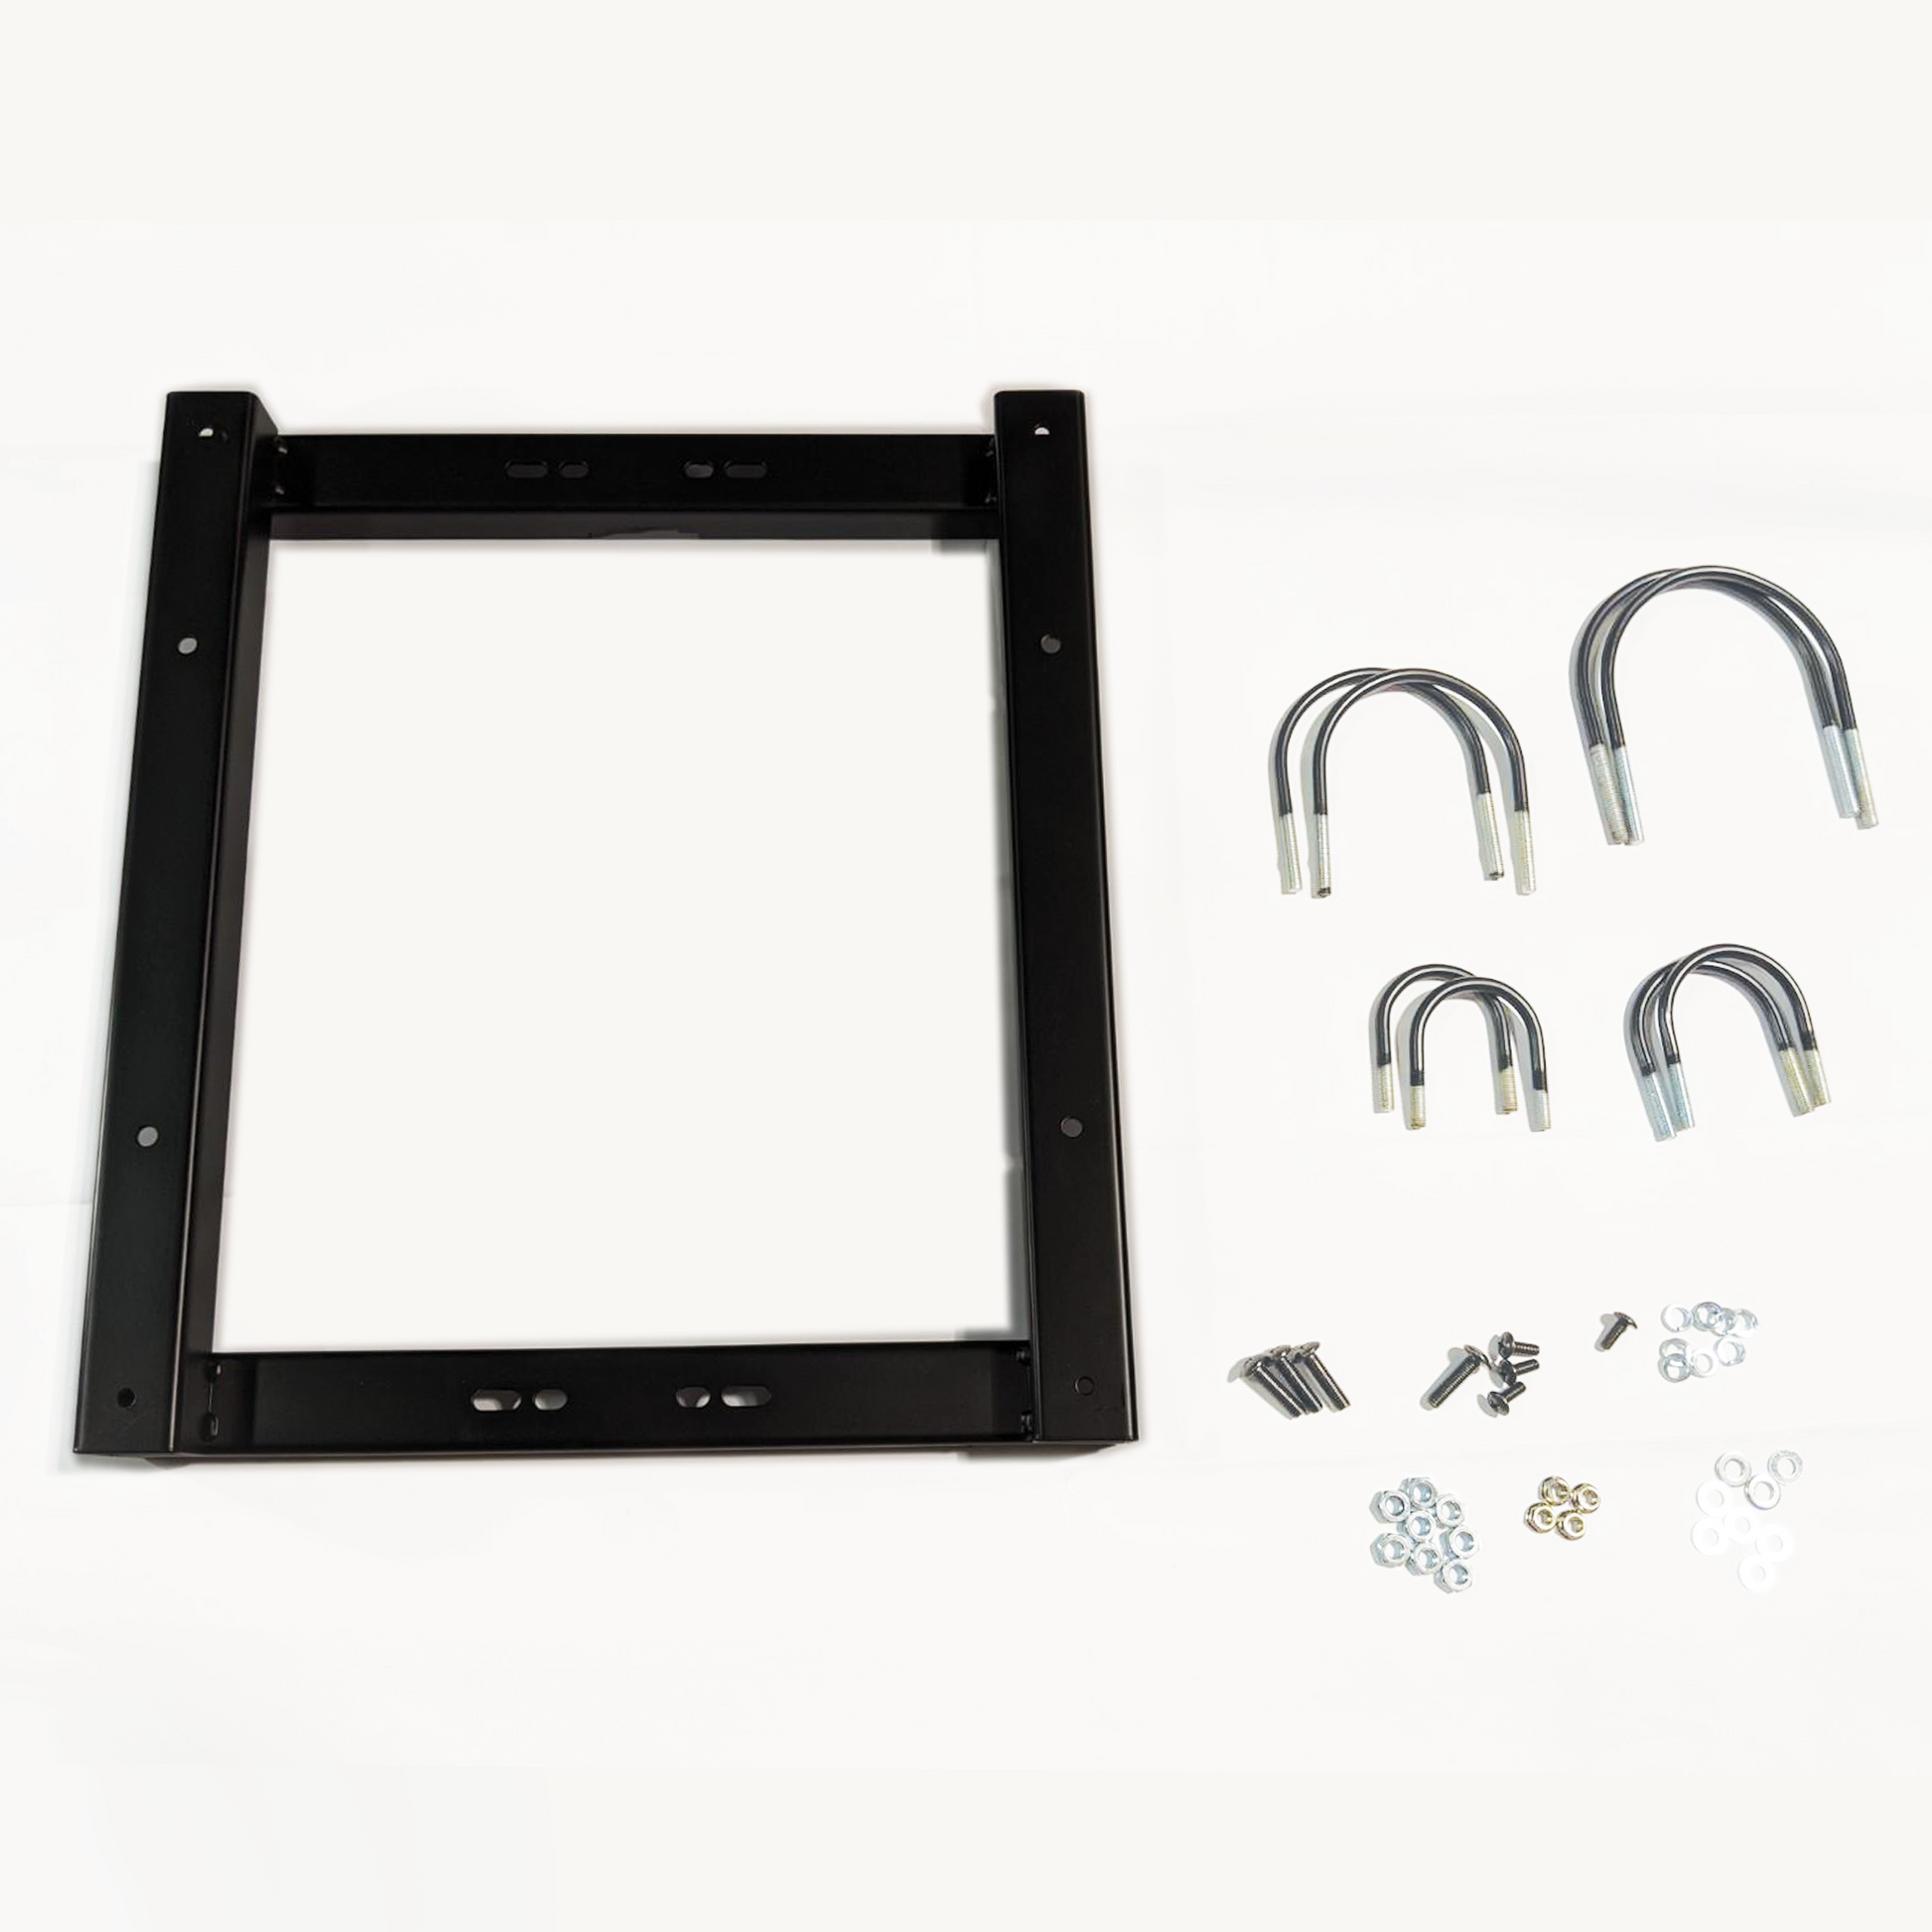 Storm Shell TV cover mounting brackets for pole assembly